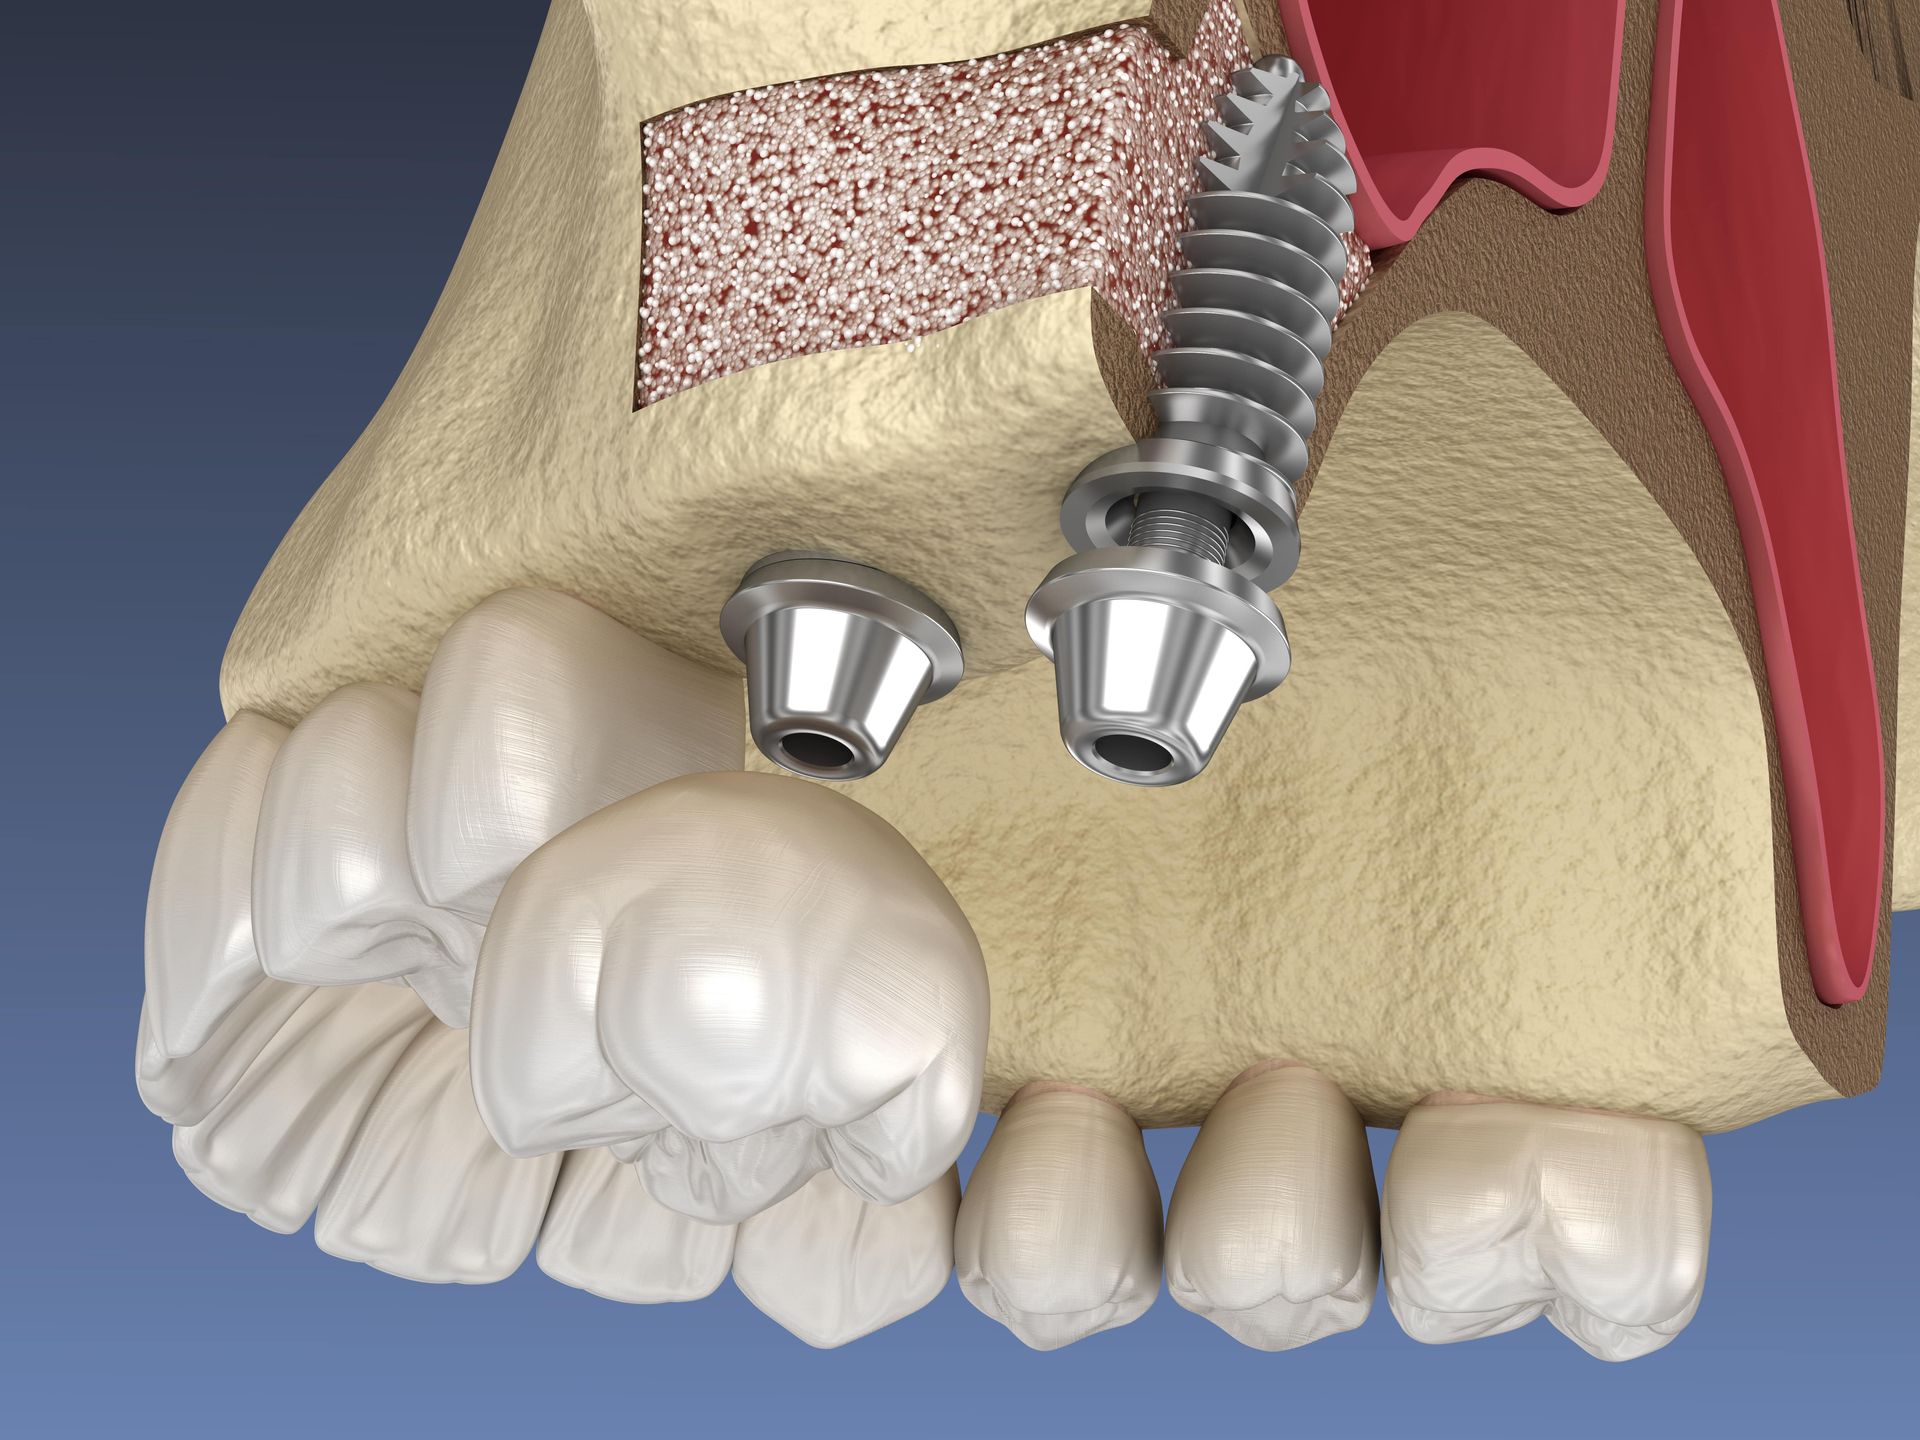 A computer generated image of two dental implants in a filled sinus